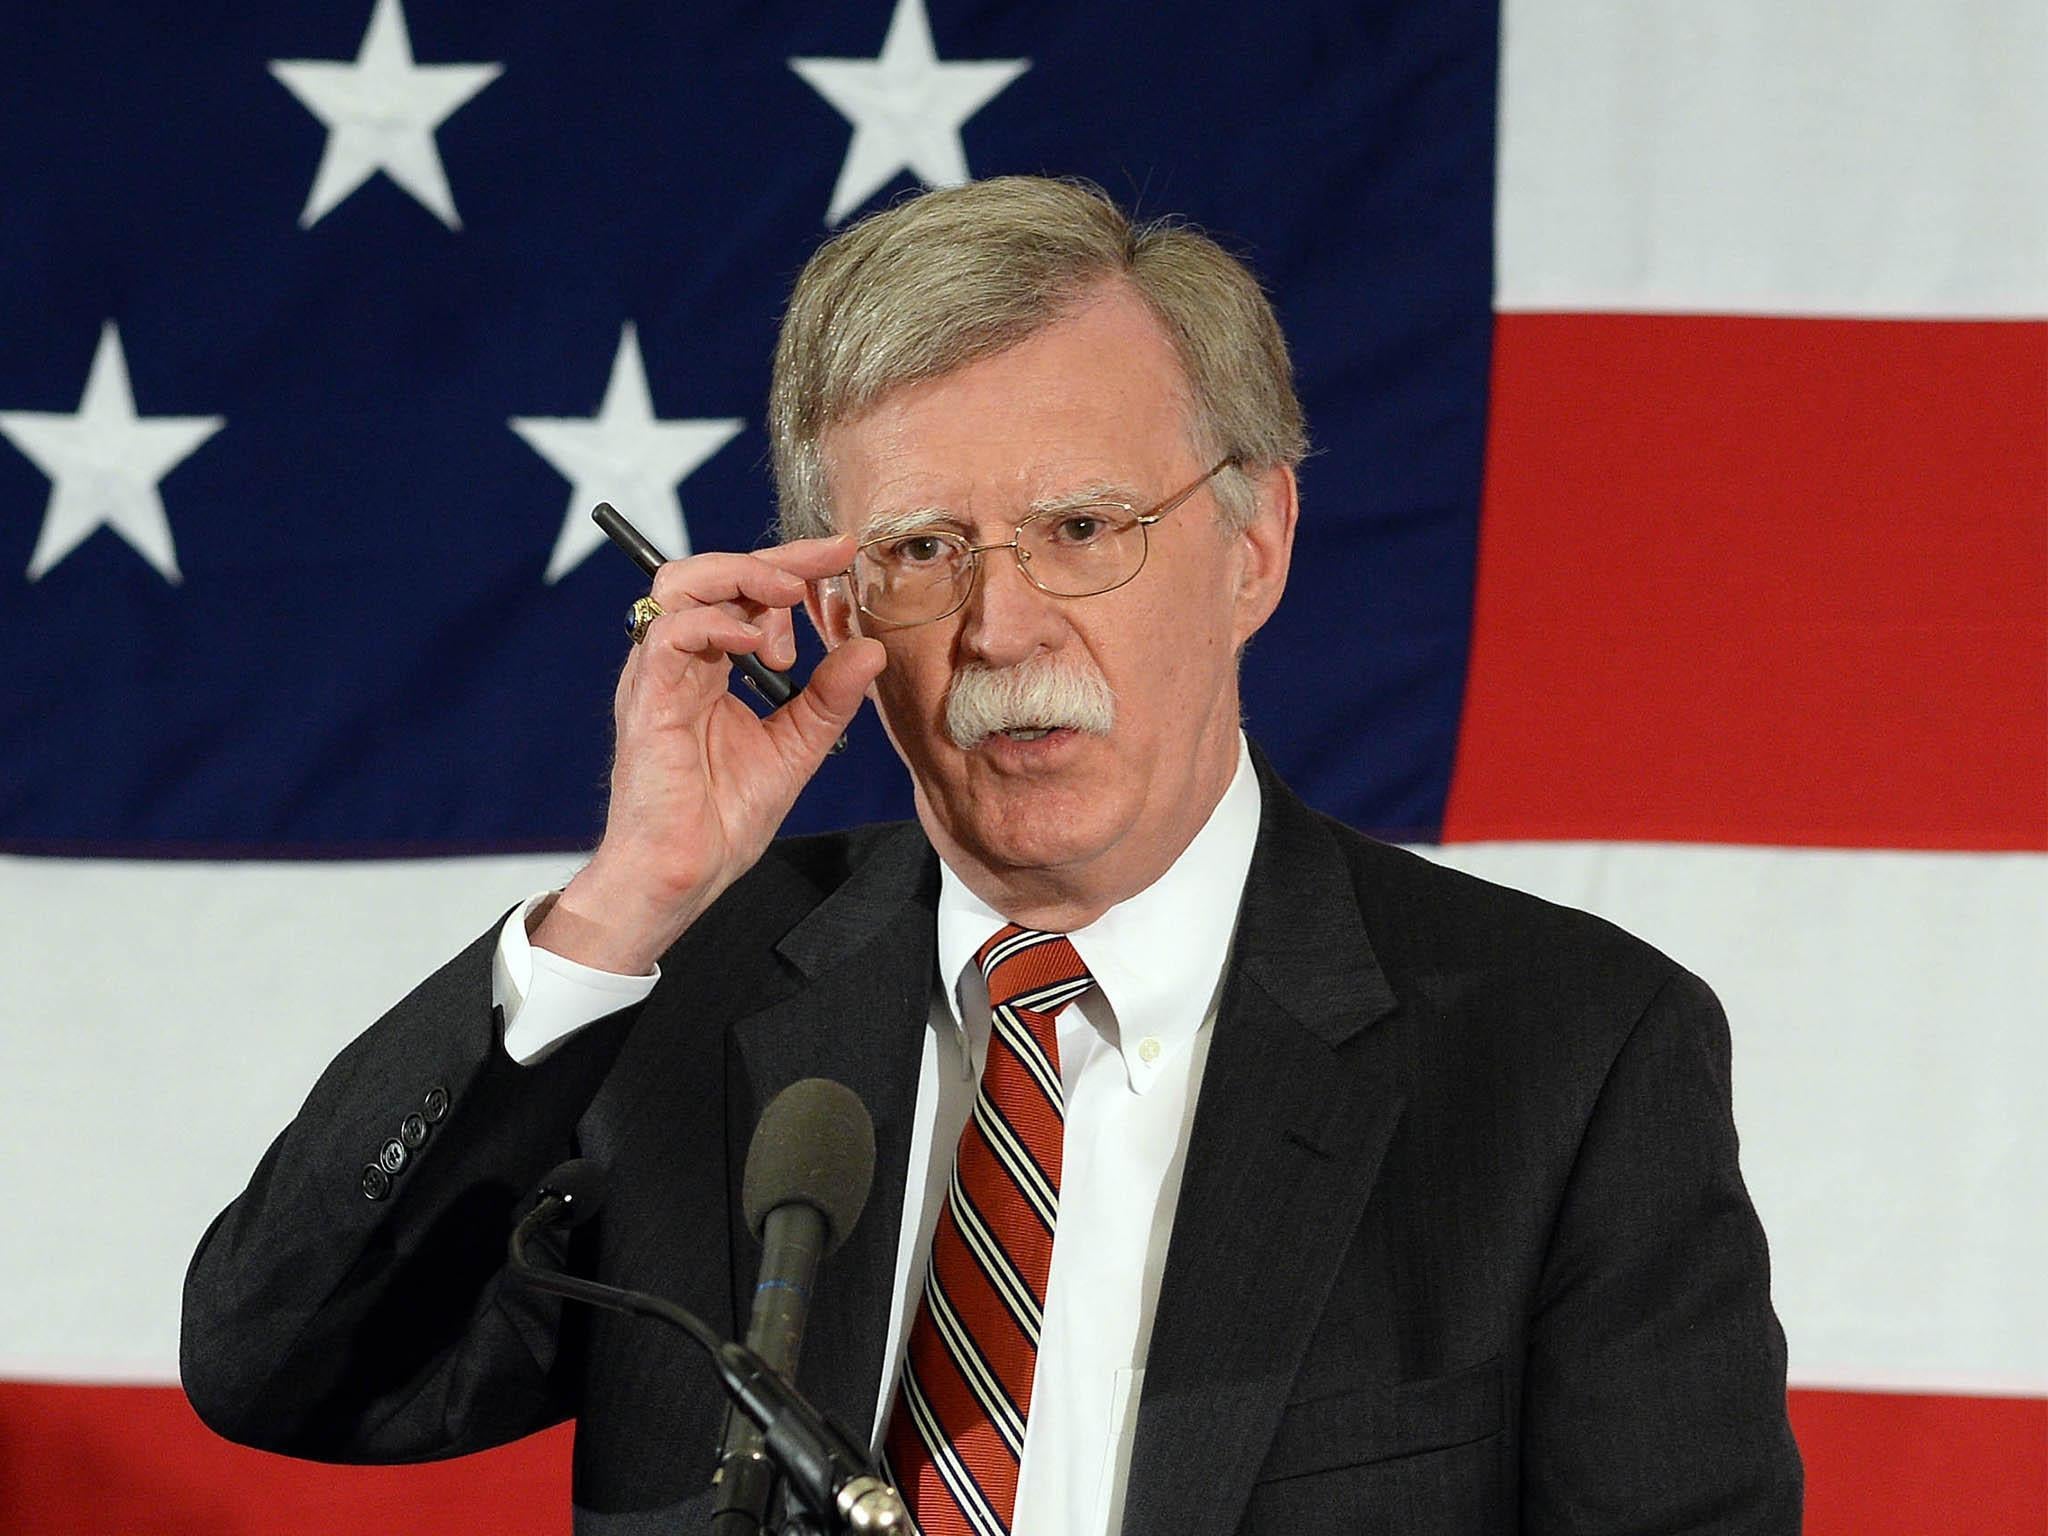 John Bolton has been appointed as national security adviser to Donald Trump